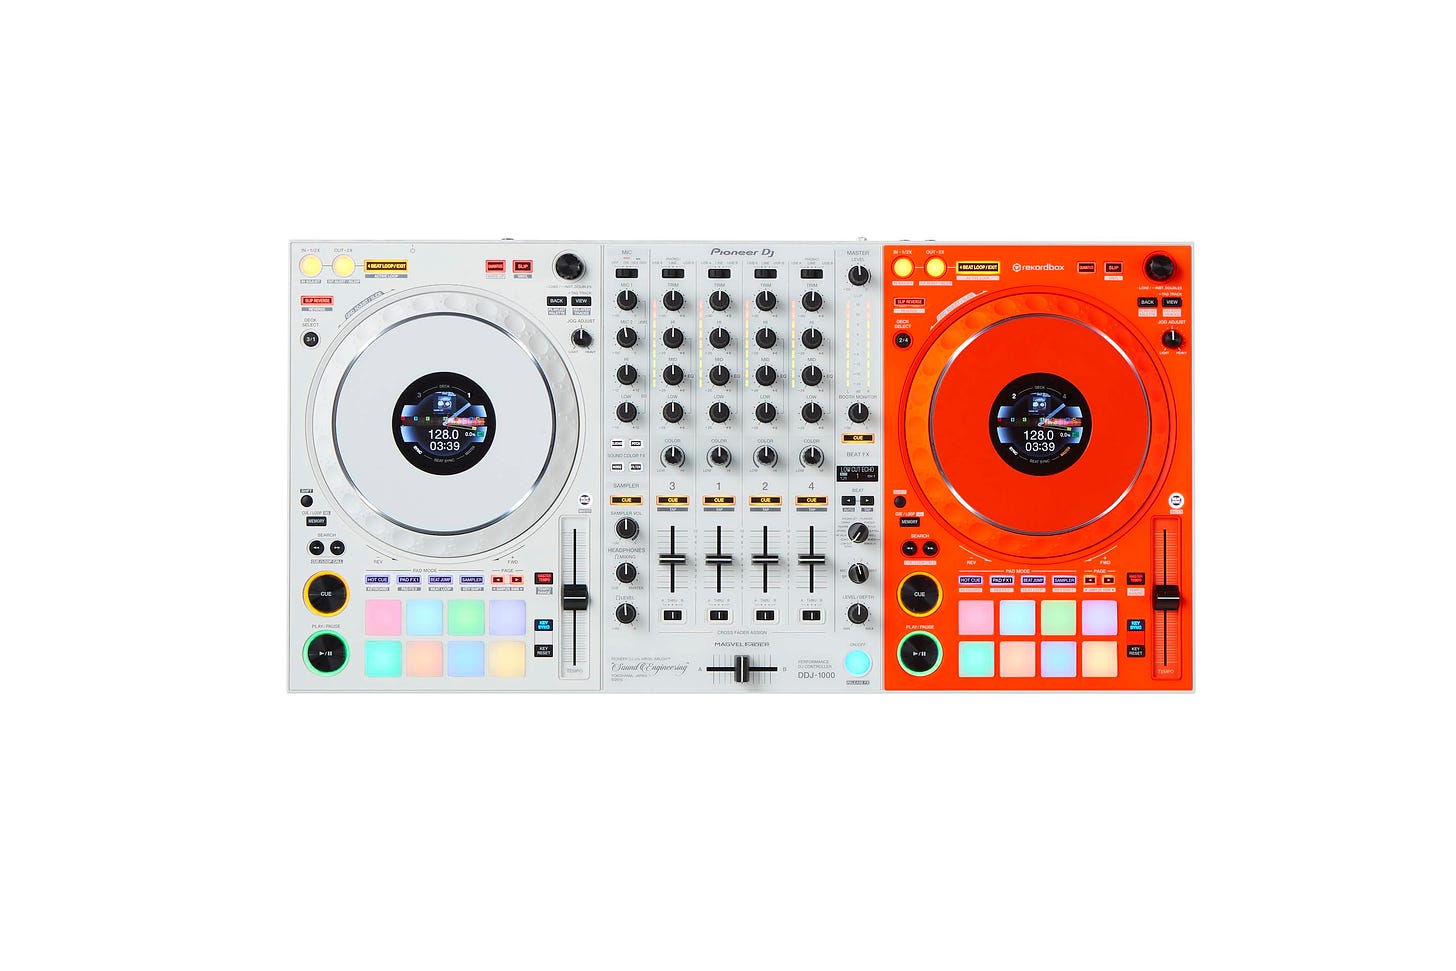 Off-White, Virgil Abloh Team With Pioneer DJ on Controller, Capsule